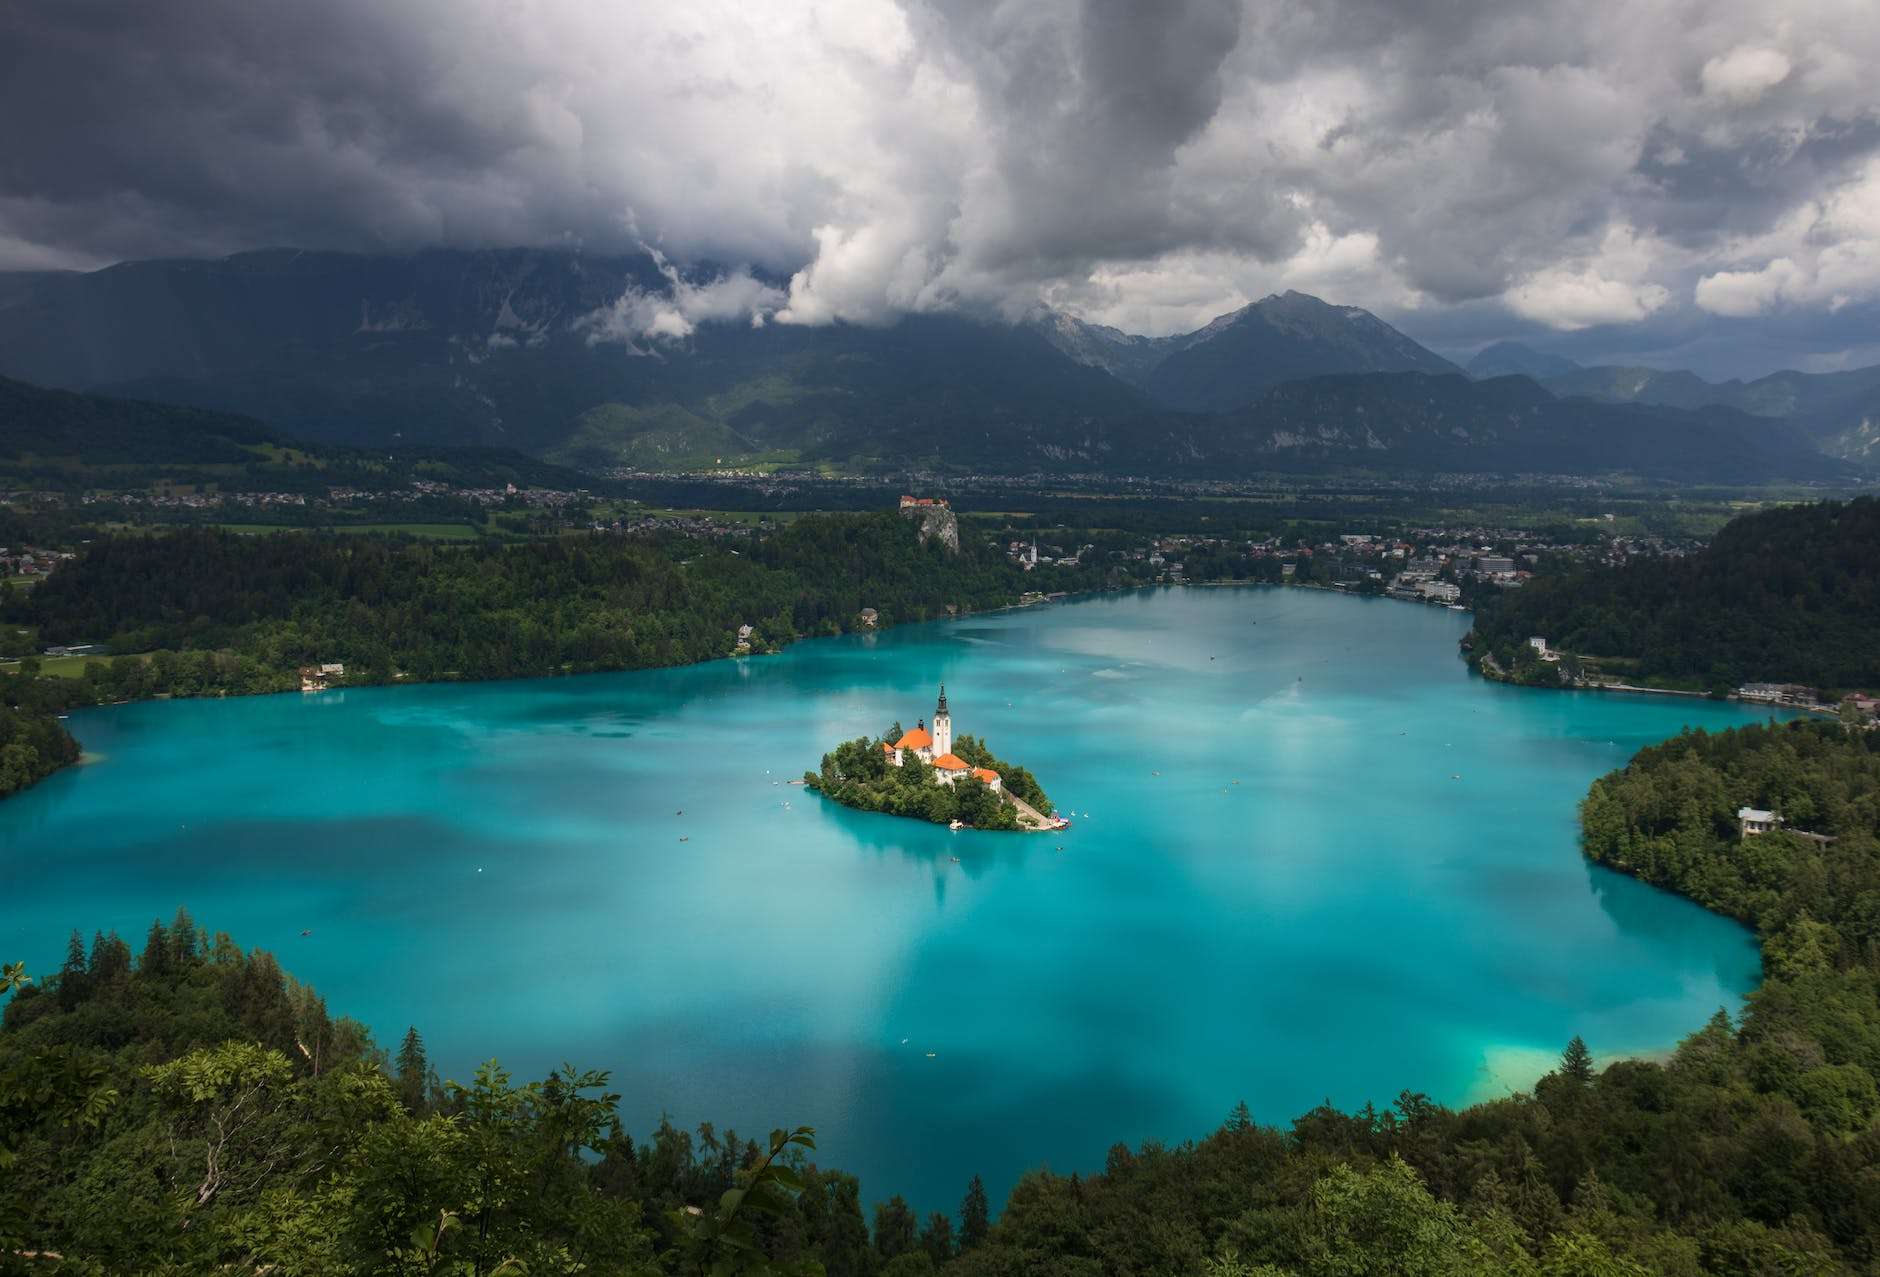 the lake bled is surrounded by green mountains